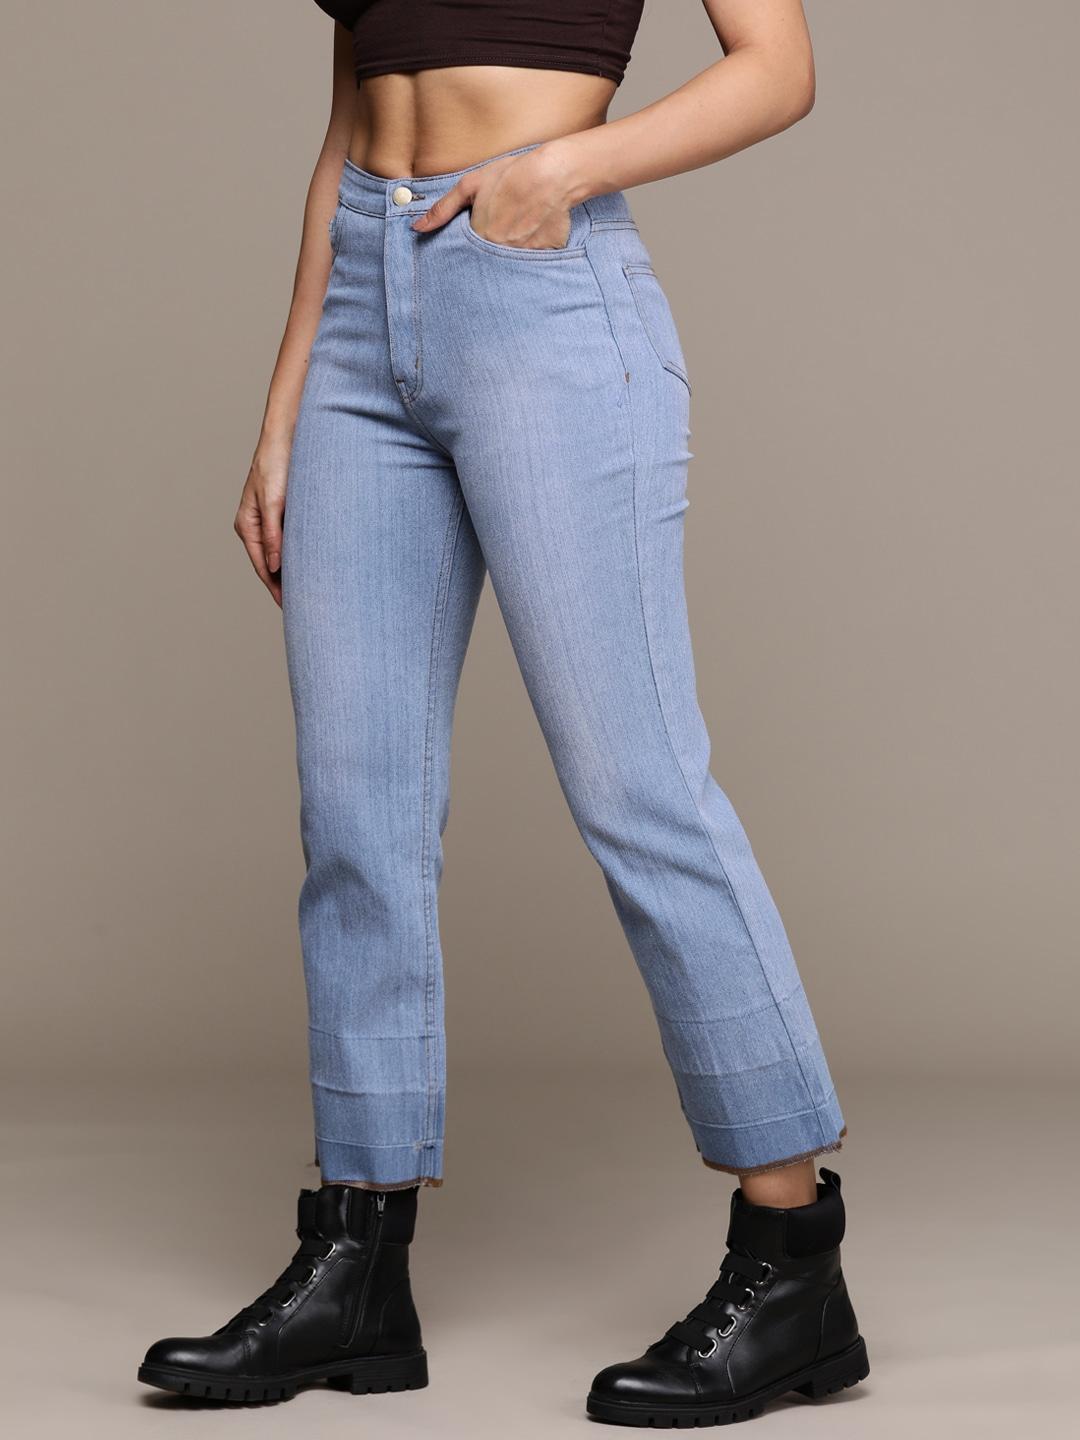 roadster-slim-fit-high-rise-jeans